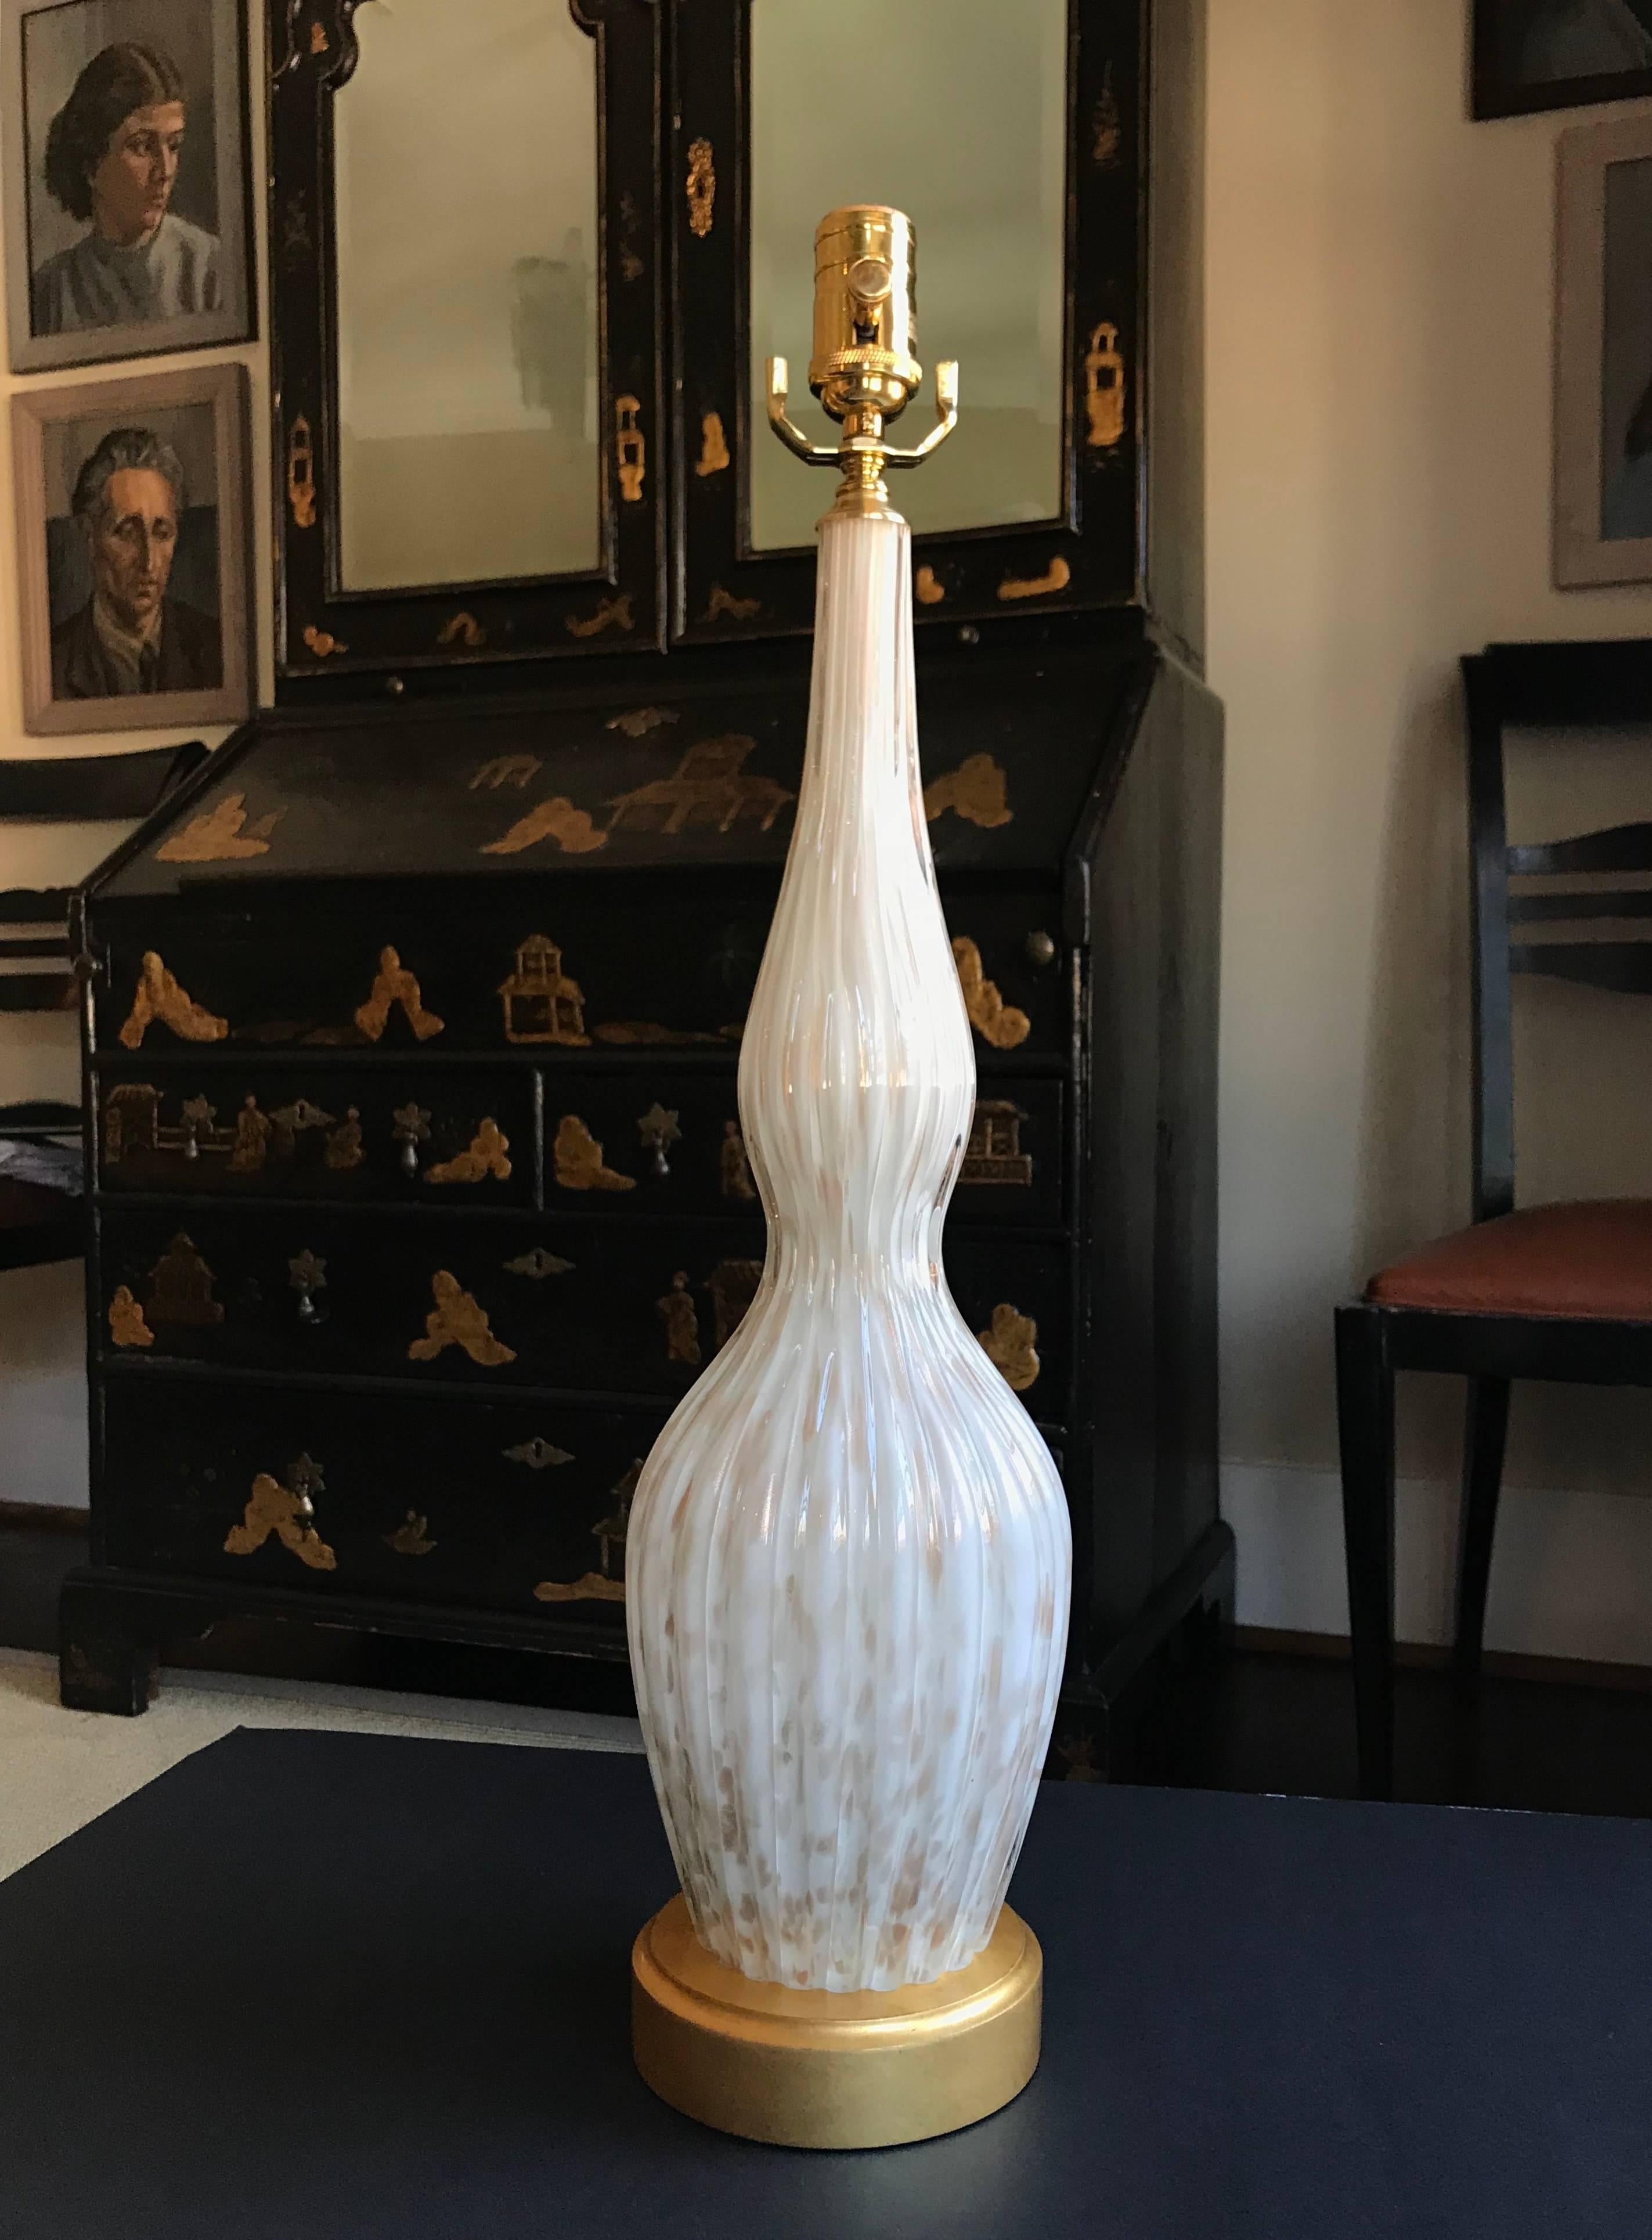 Single Italian Murano glass lamp with thick ribs of clear glass encasing white glass with bubbles and gold aventurine flecks in double gourd form. Newly wired for US with full range dimmer socket, brass fittings, 23-karat matte gold gilt heavy wood